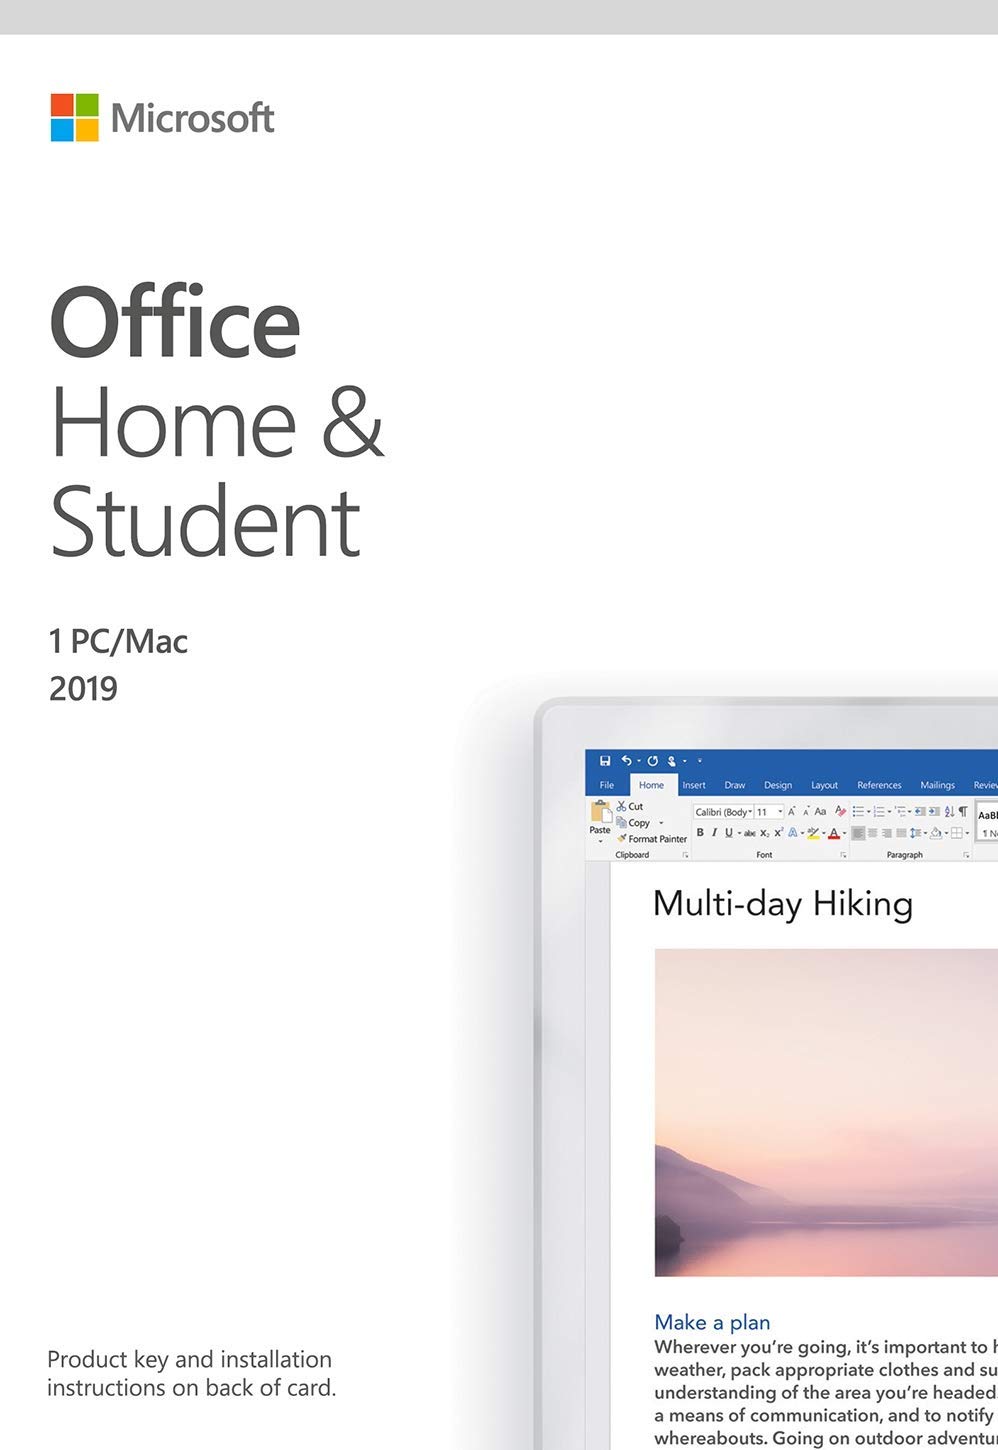 how to activate microsoft office home and business 2019